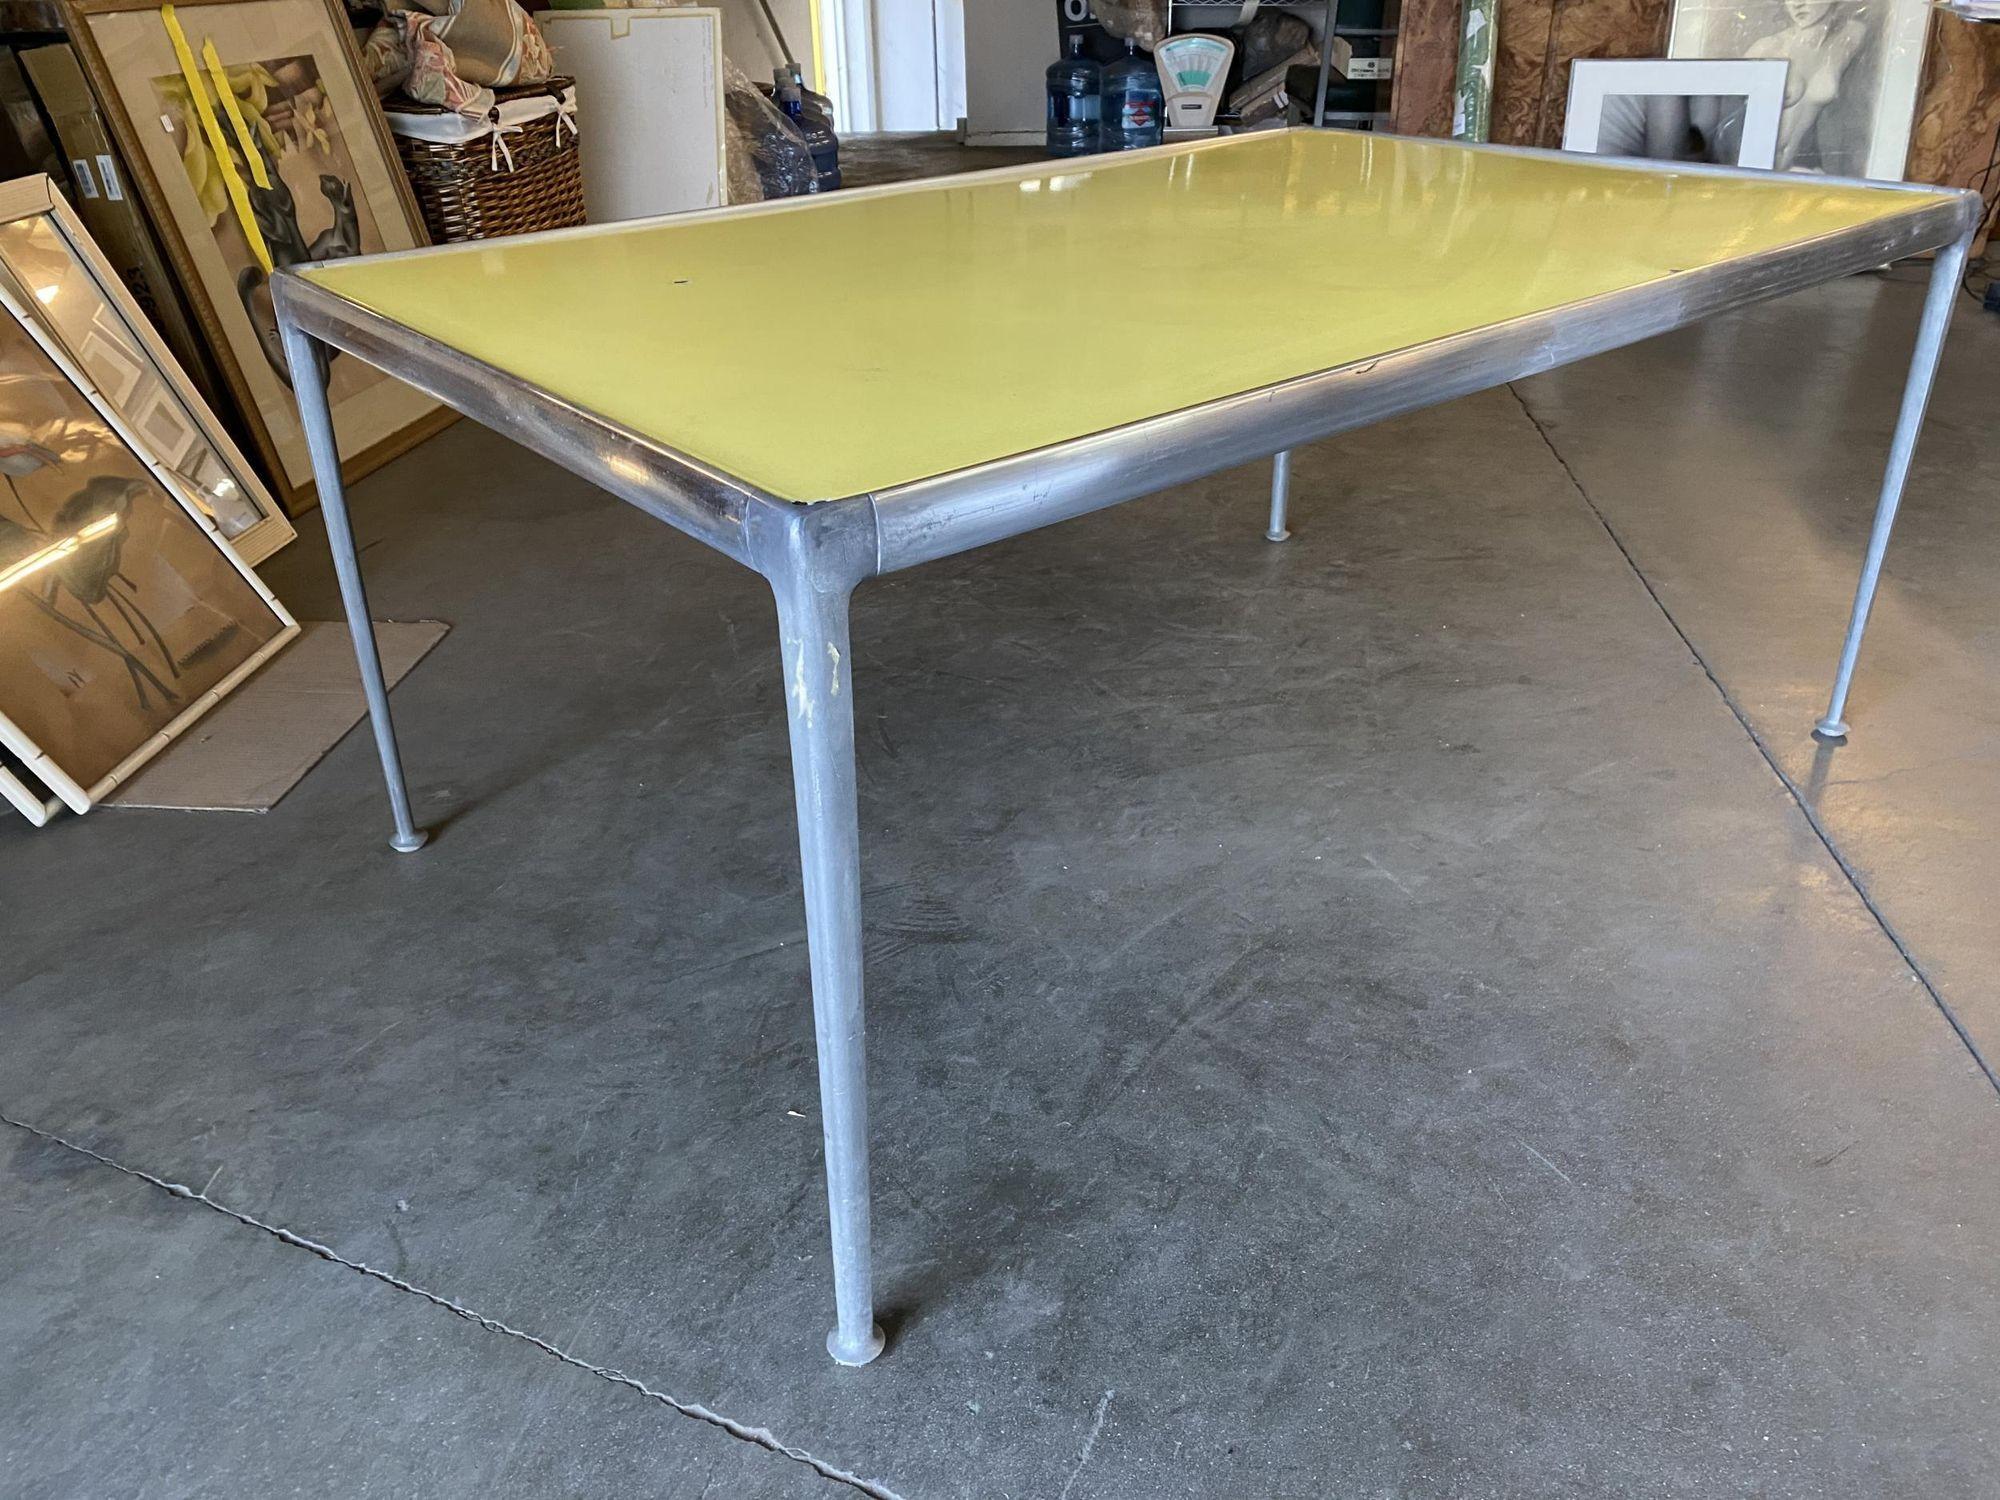 Early Richard Shultz for Knoll outdoor dining table, circa 1966 machined aluminum table base with stunning yellow enamel top. The tabletop features a 1/2